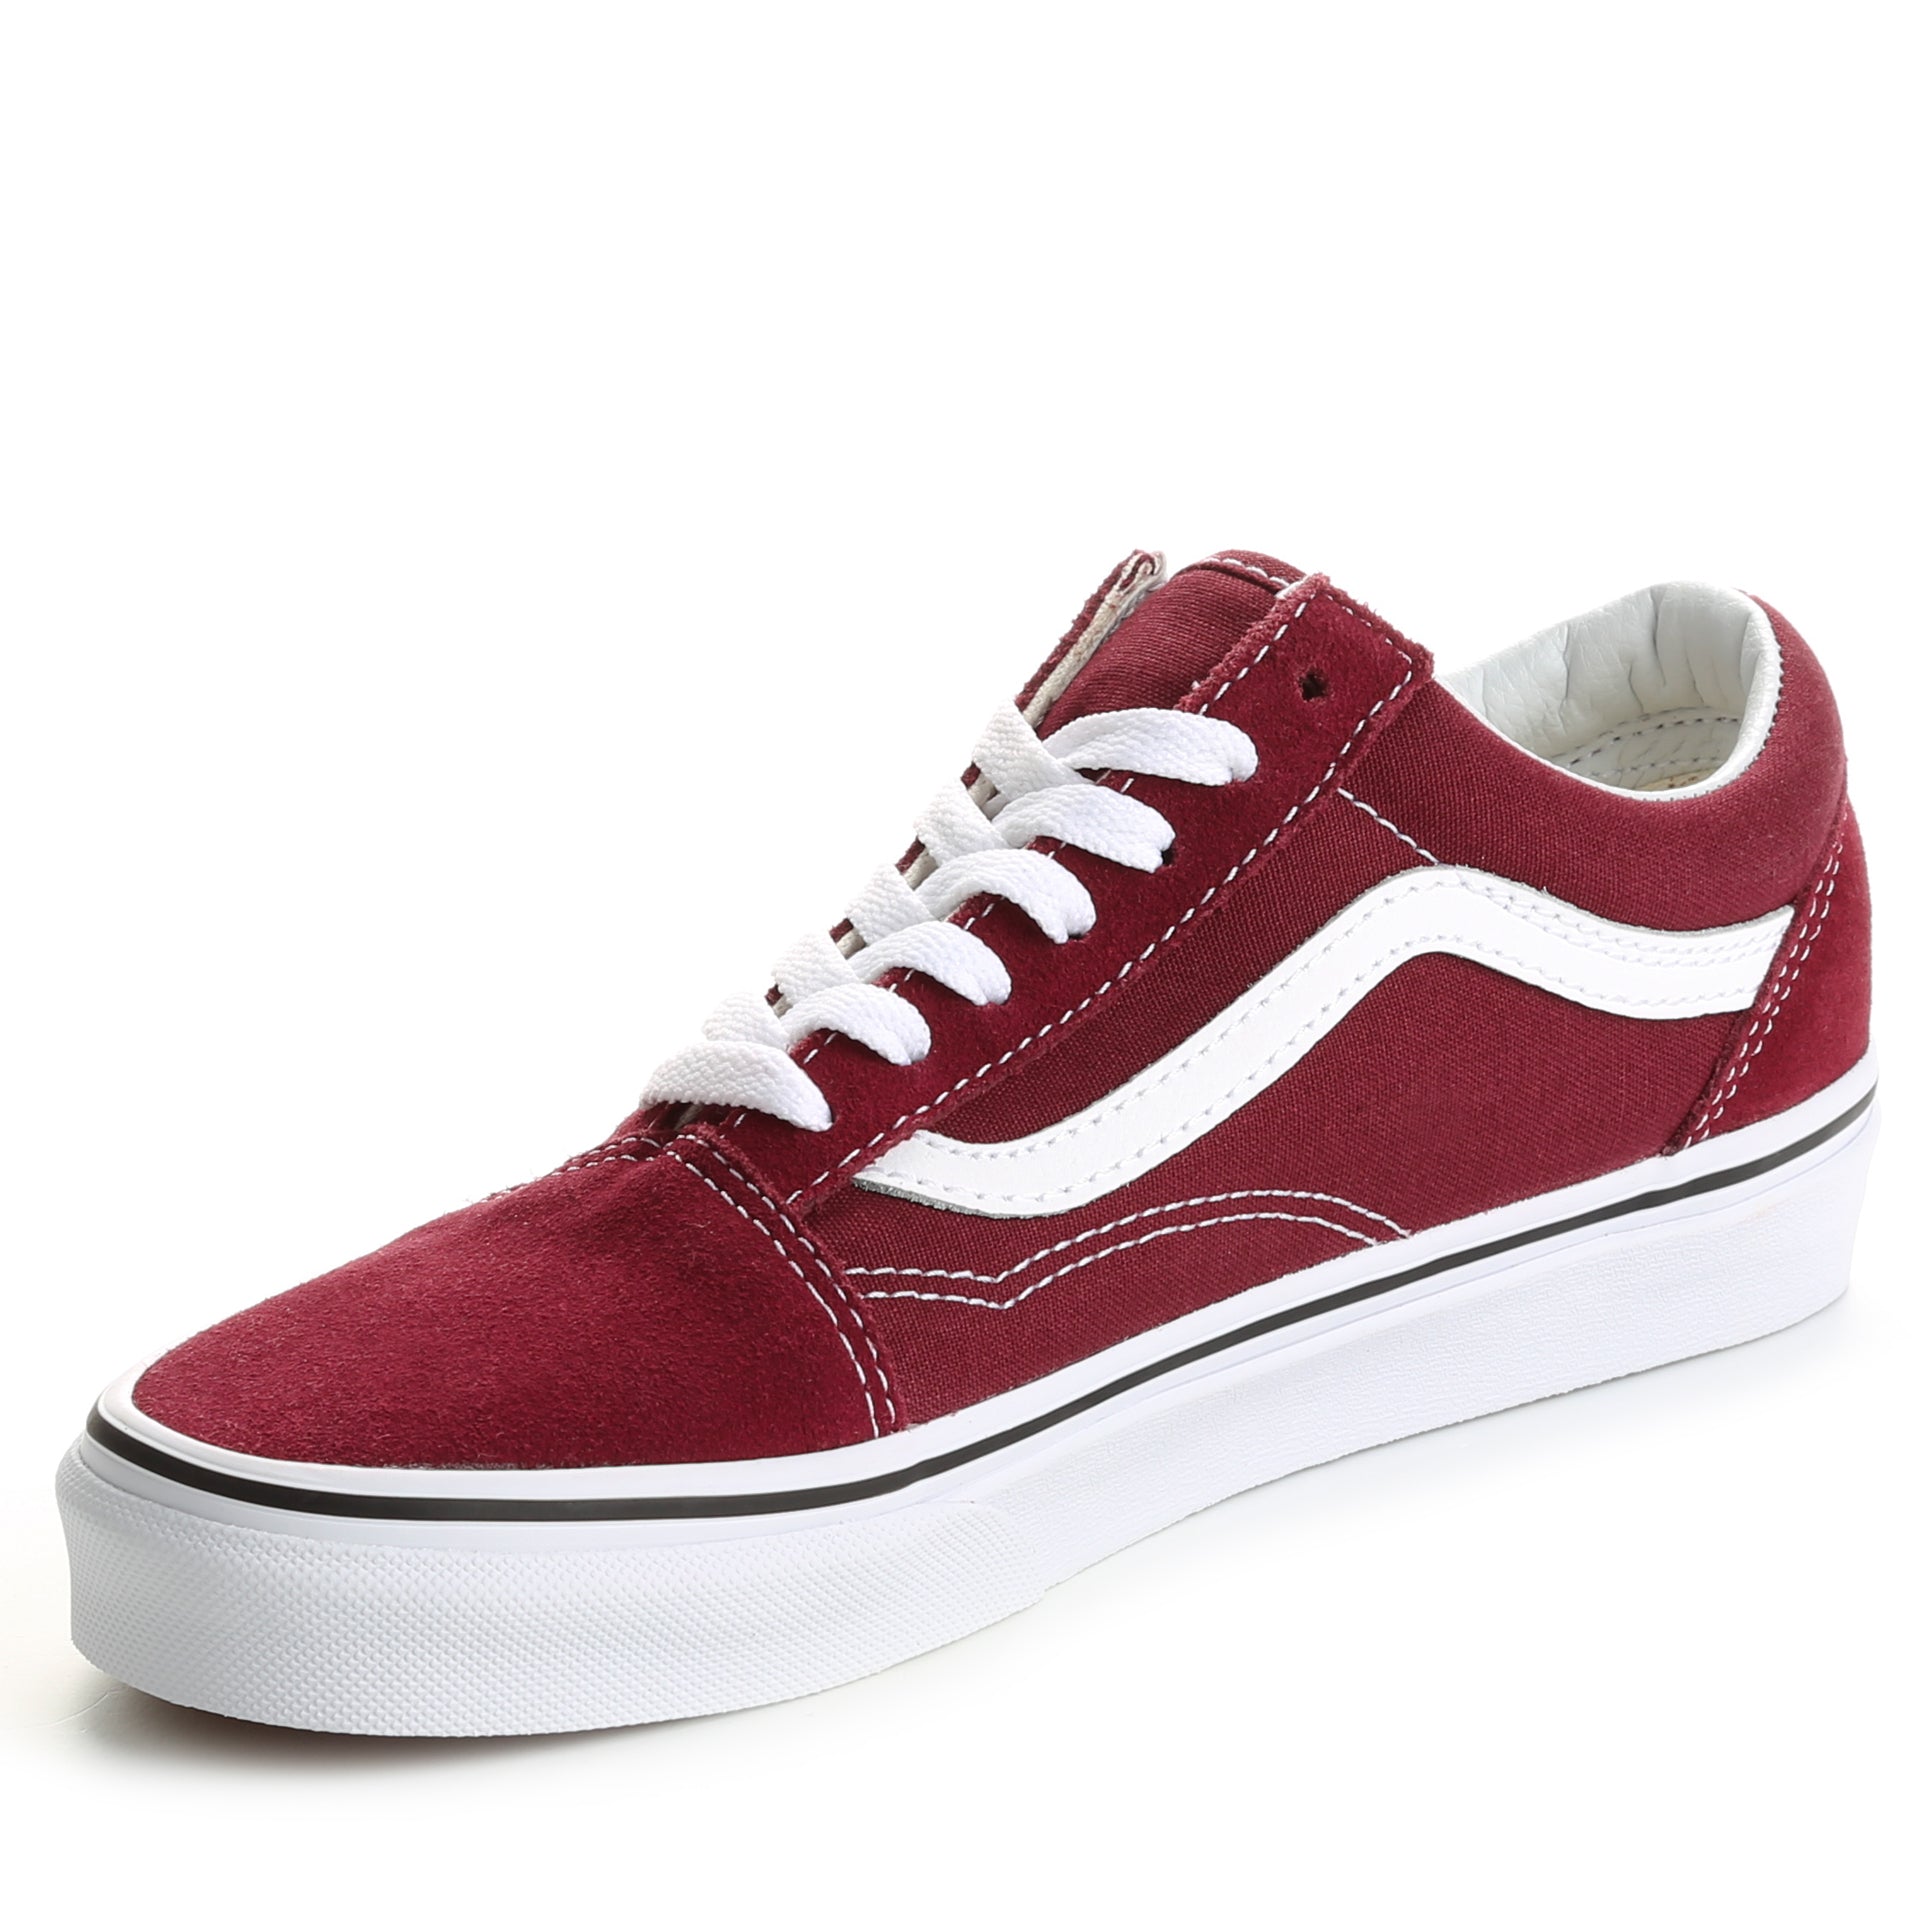 Vans Old Skool Unisex Trainers In Burgundy (4,675 MKD) ❤ liked on Polyvore  featuring shoes, sneakers, red, high top slip on s…